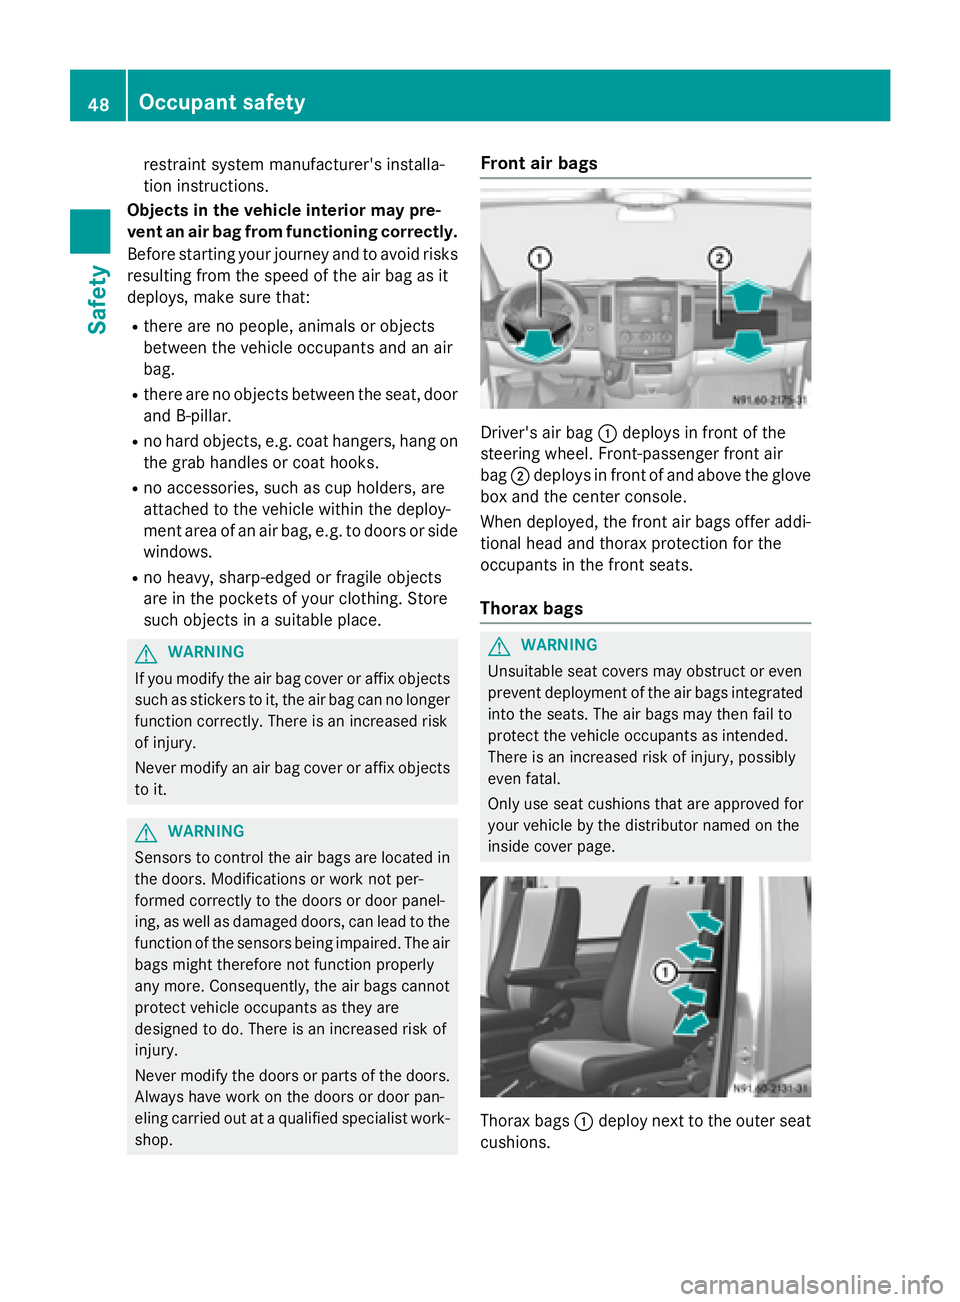 MERCEDES-BENZ SPRINTER 2015  MY15 Operator’s Manual restraint system manufacturer's installa-
tion instructions.
Objects in the vehicle interior may pre-
vent an air bag from functioning correctly.
Before starting your journey and to avoid risks
re